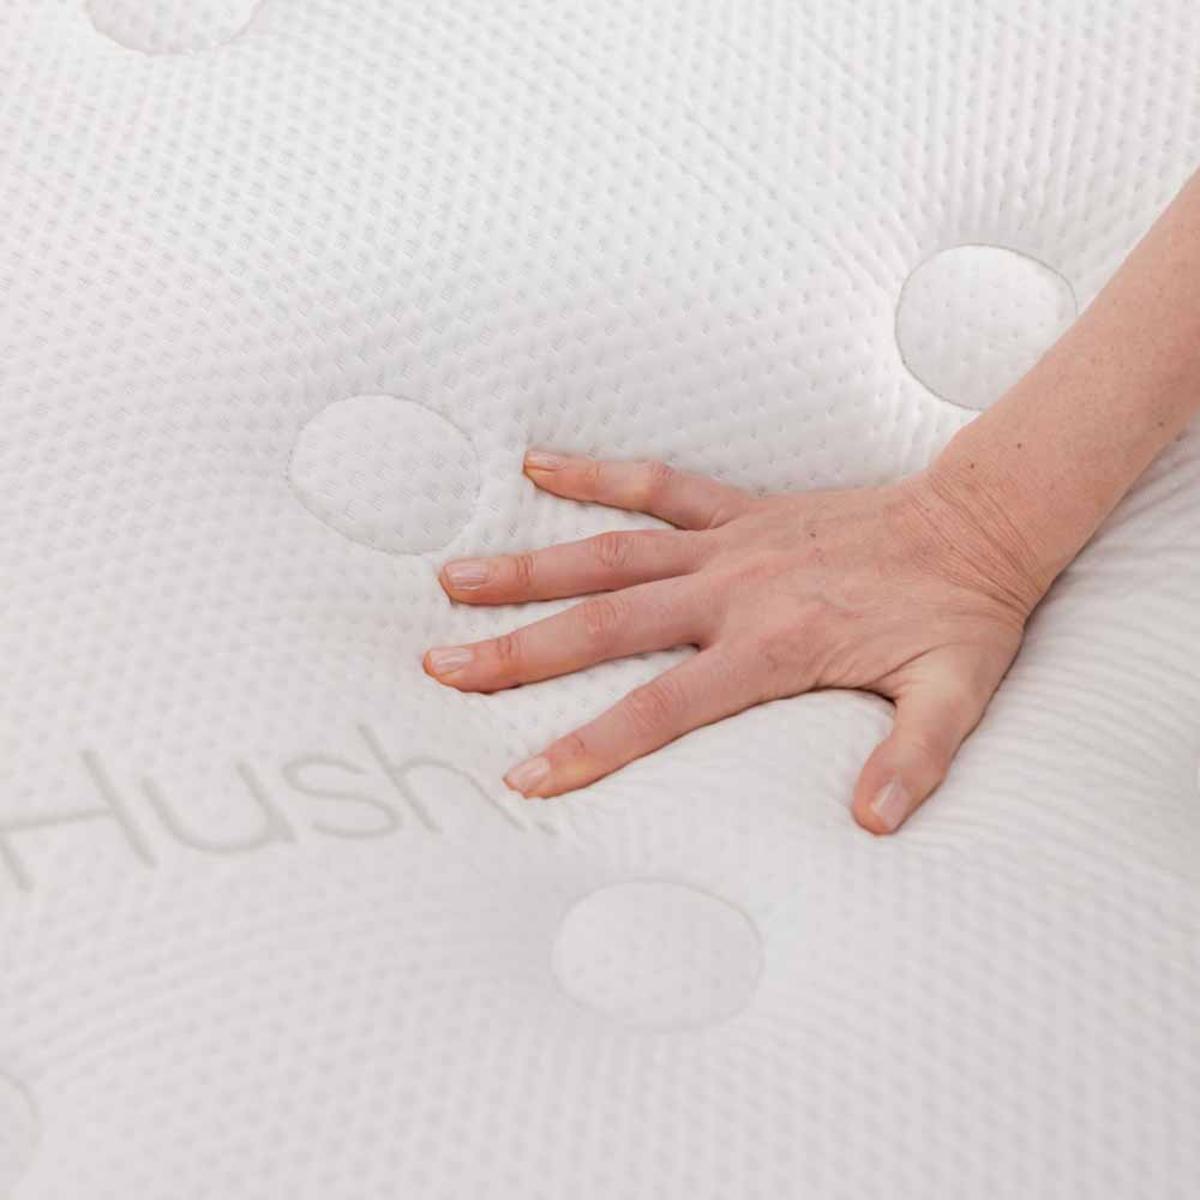 Hush Iced Hybrid 2-in-1 Cooling Mattress with Memory Foam and Springs - Twin/White